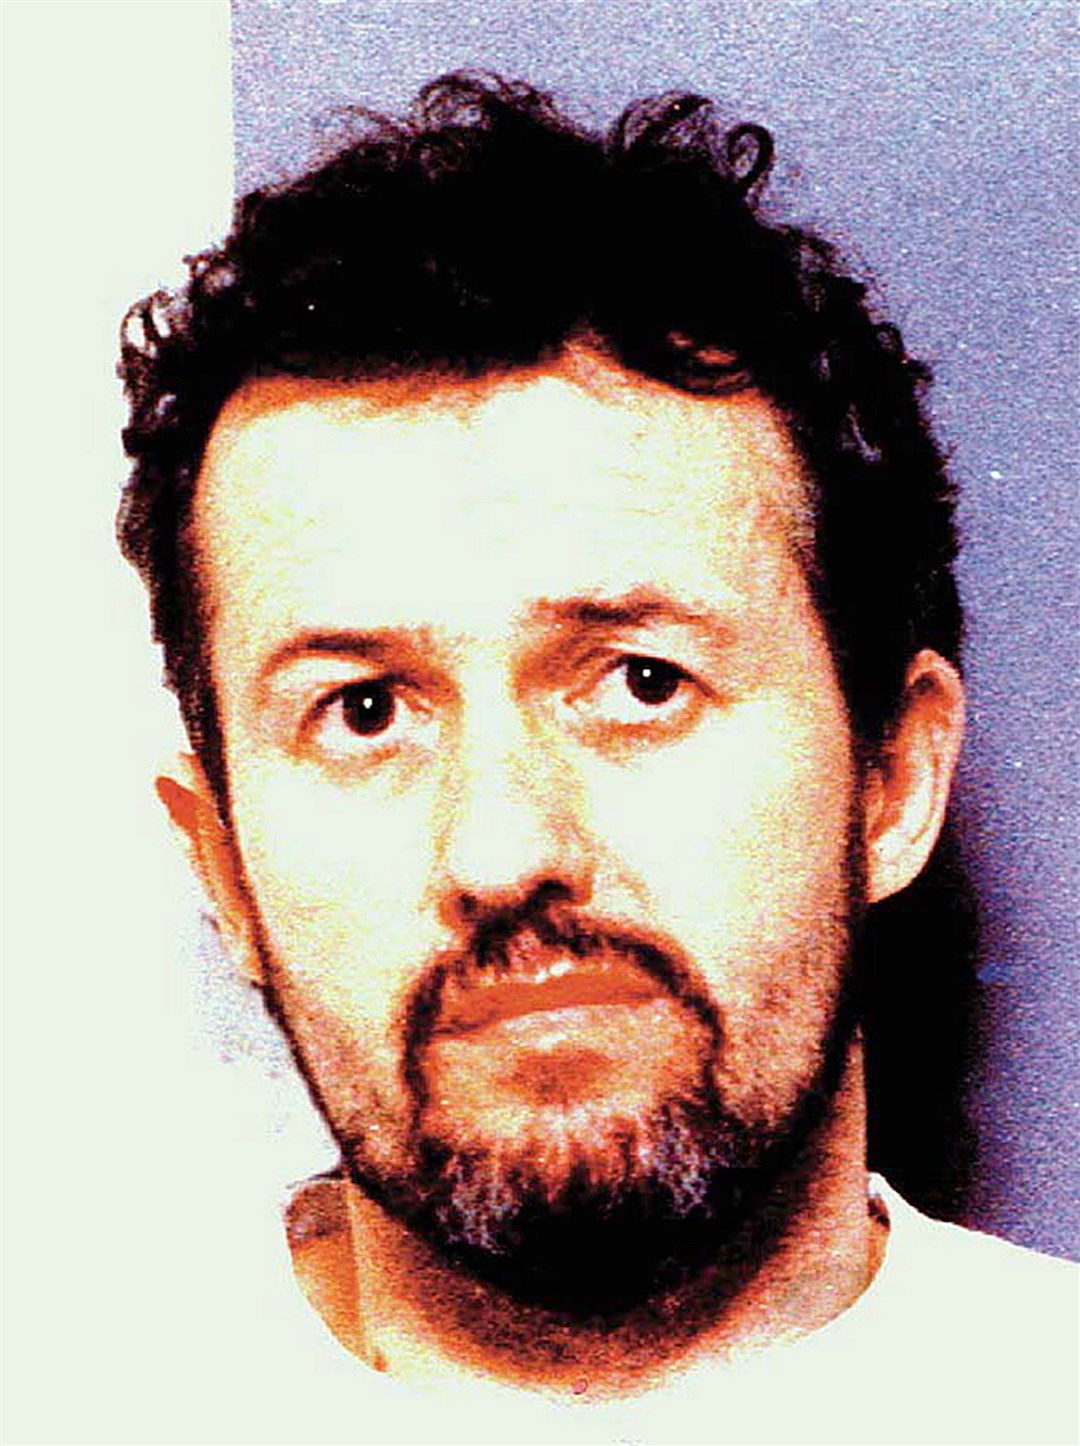 Convicted paedophile Barry Bennell told the court he was not employed by Manchester City at the time of the offences (PA)